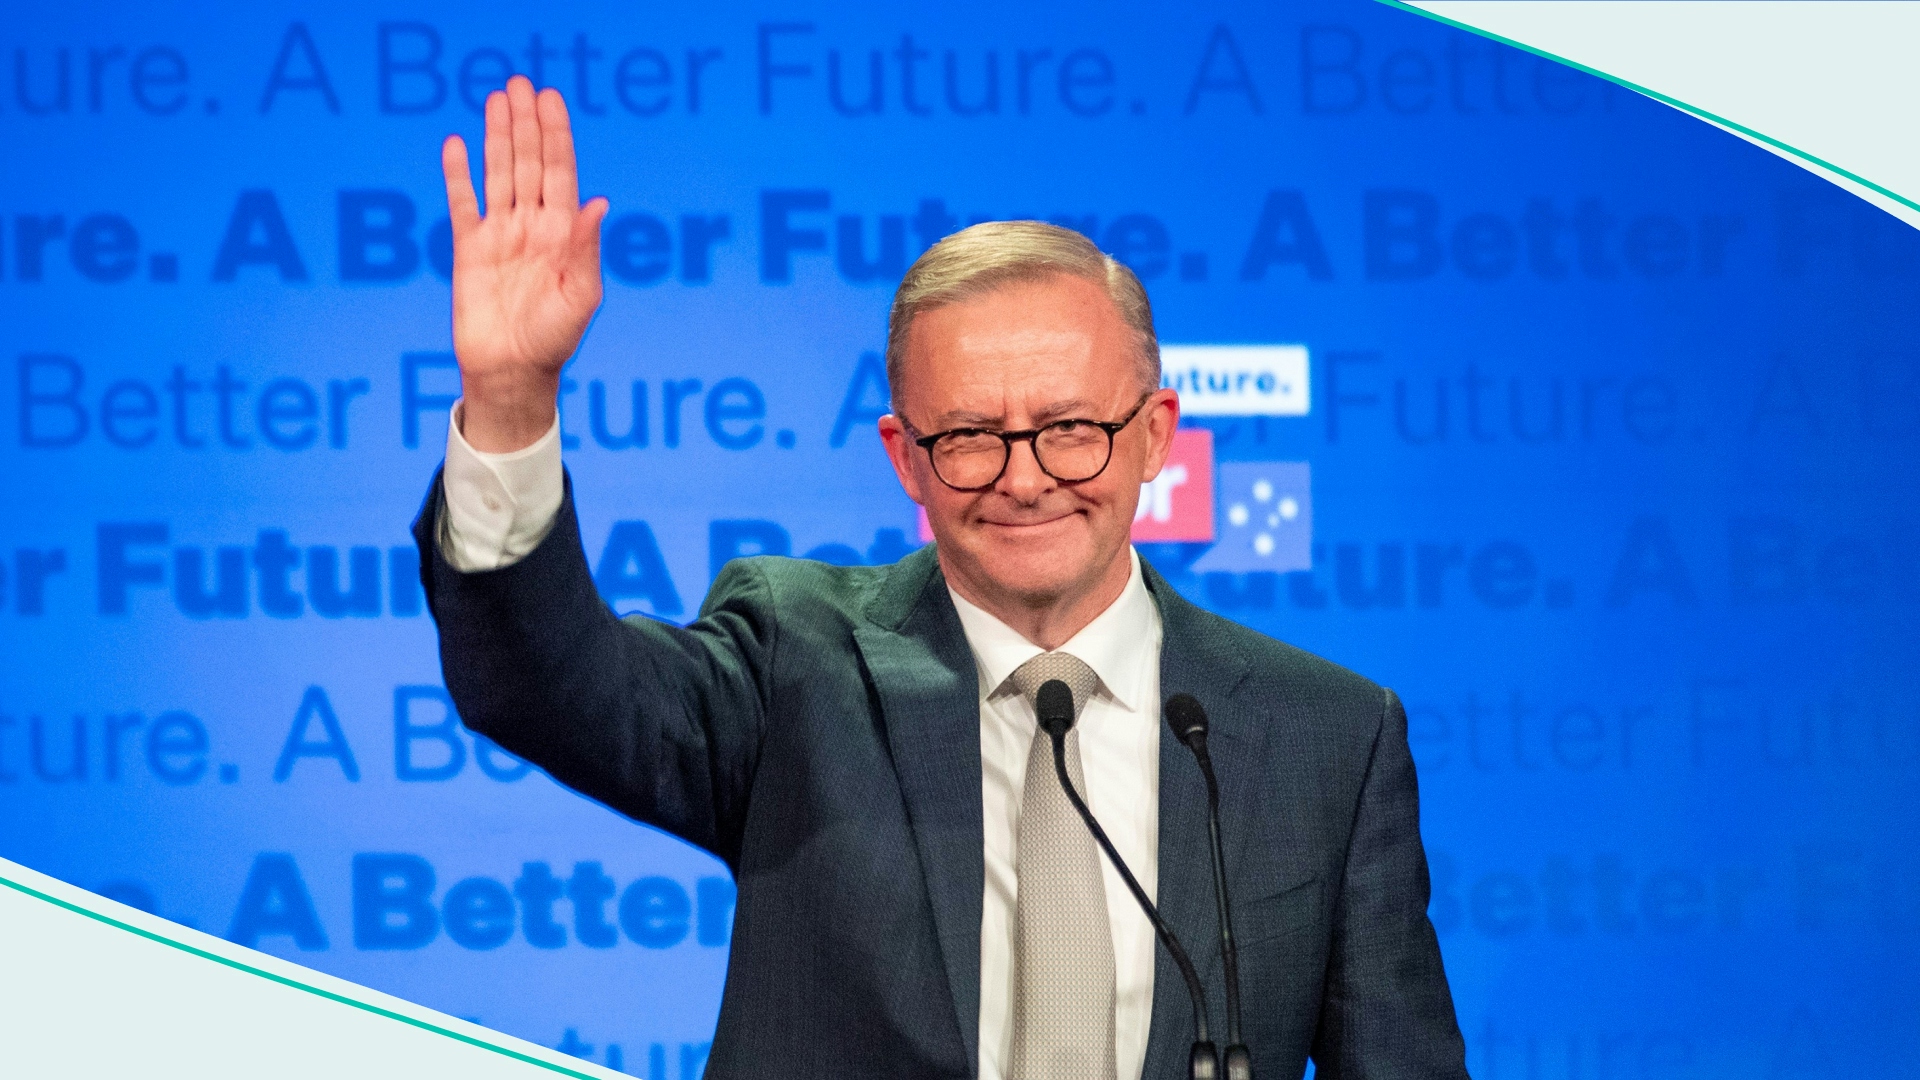 Anthony Albanese gestures as addressing supporters in Sydney, Australia, May 21, 2022. 